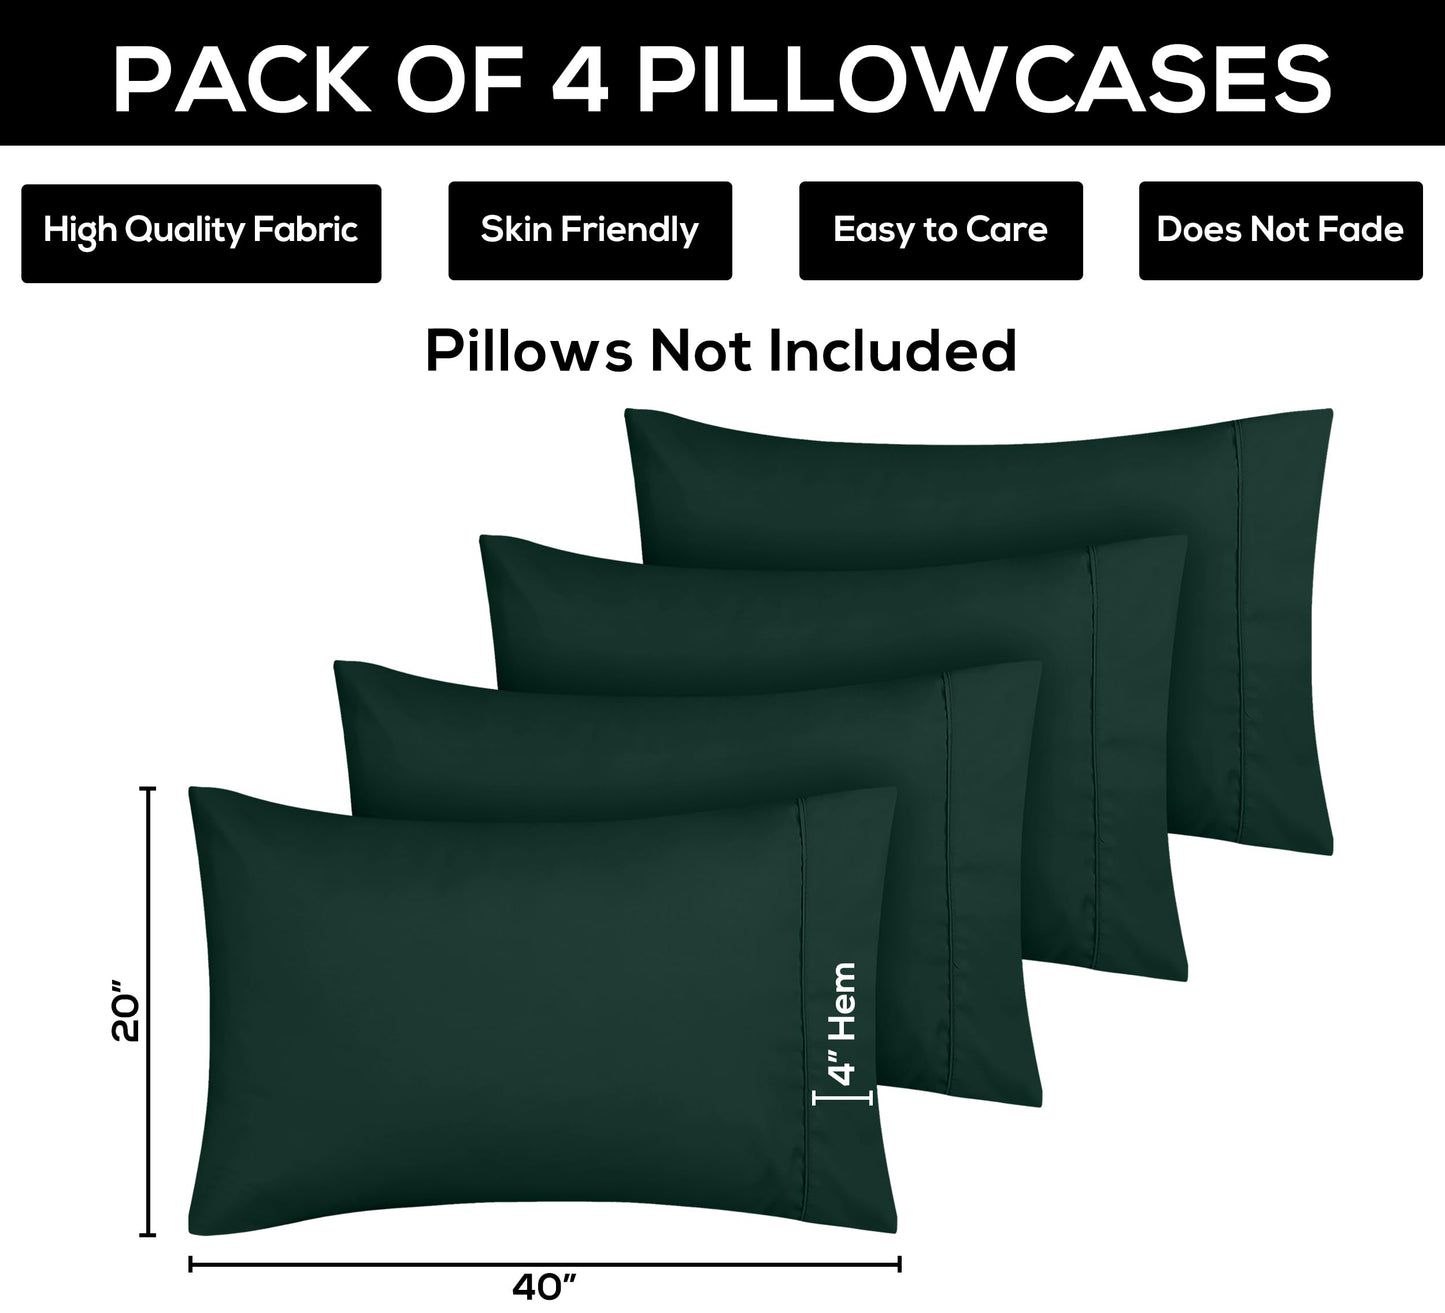 Utopia Bedding Queen Pillow Cases - 4 Pack - Envelope Closure - Soft Brushed Microfiber Fabric - Shrinkage and Fade Resistant Pillow Cases Queen Size 20 X 30 Inches (Queen, Emerald)